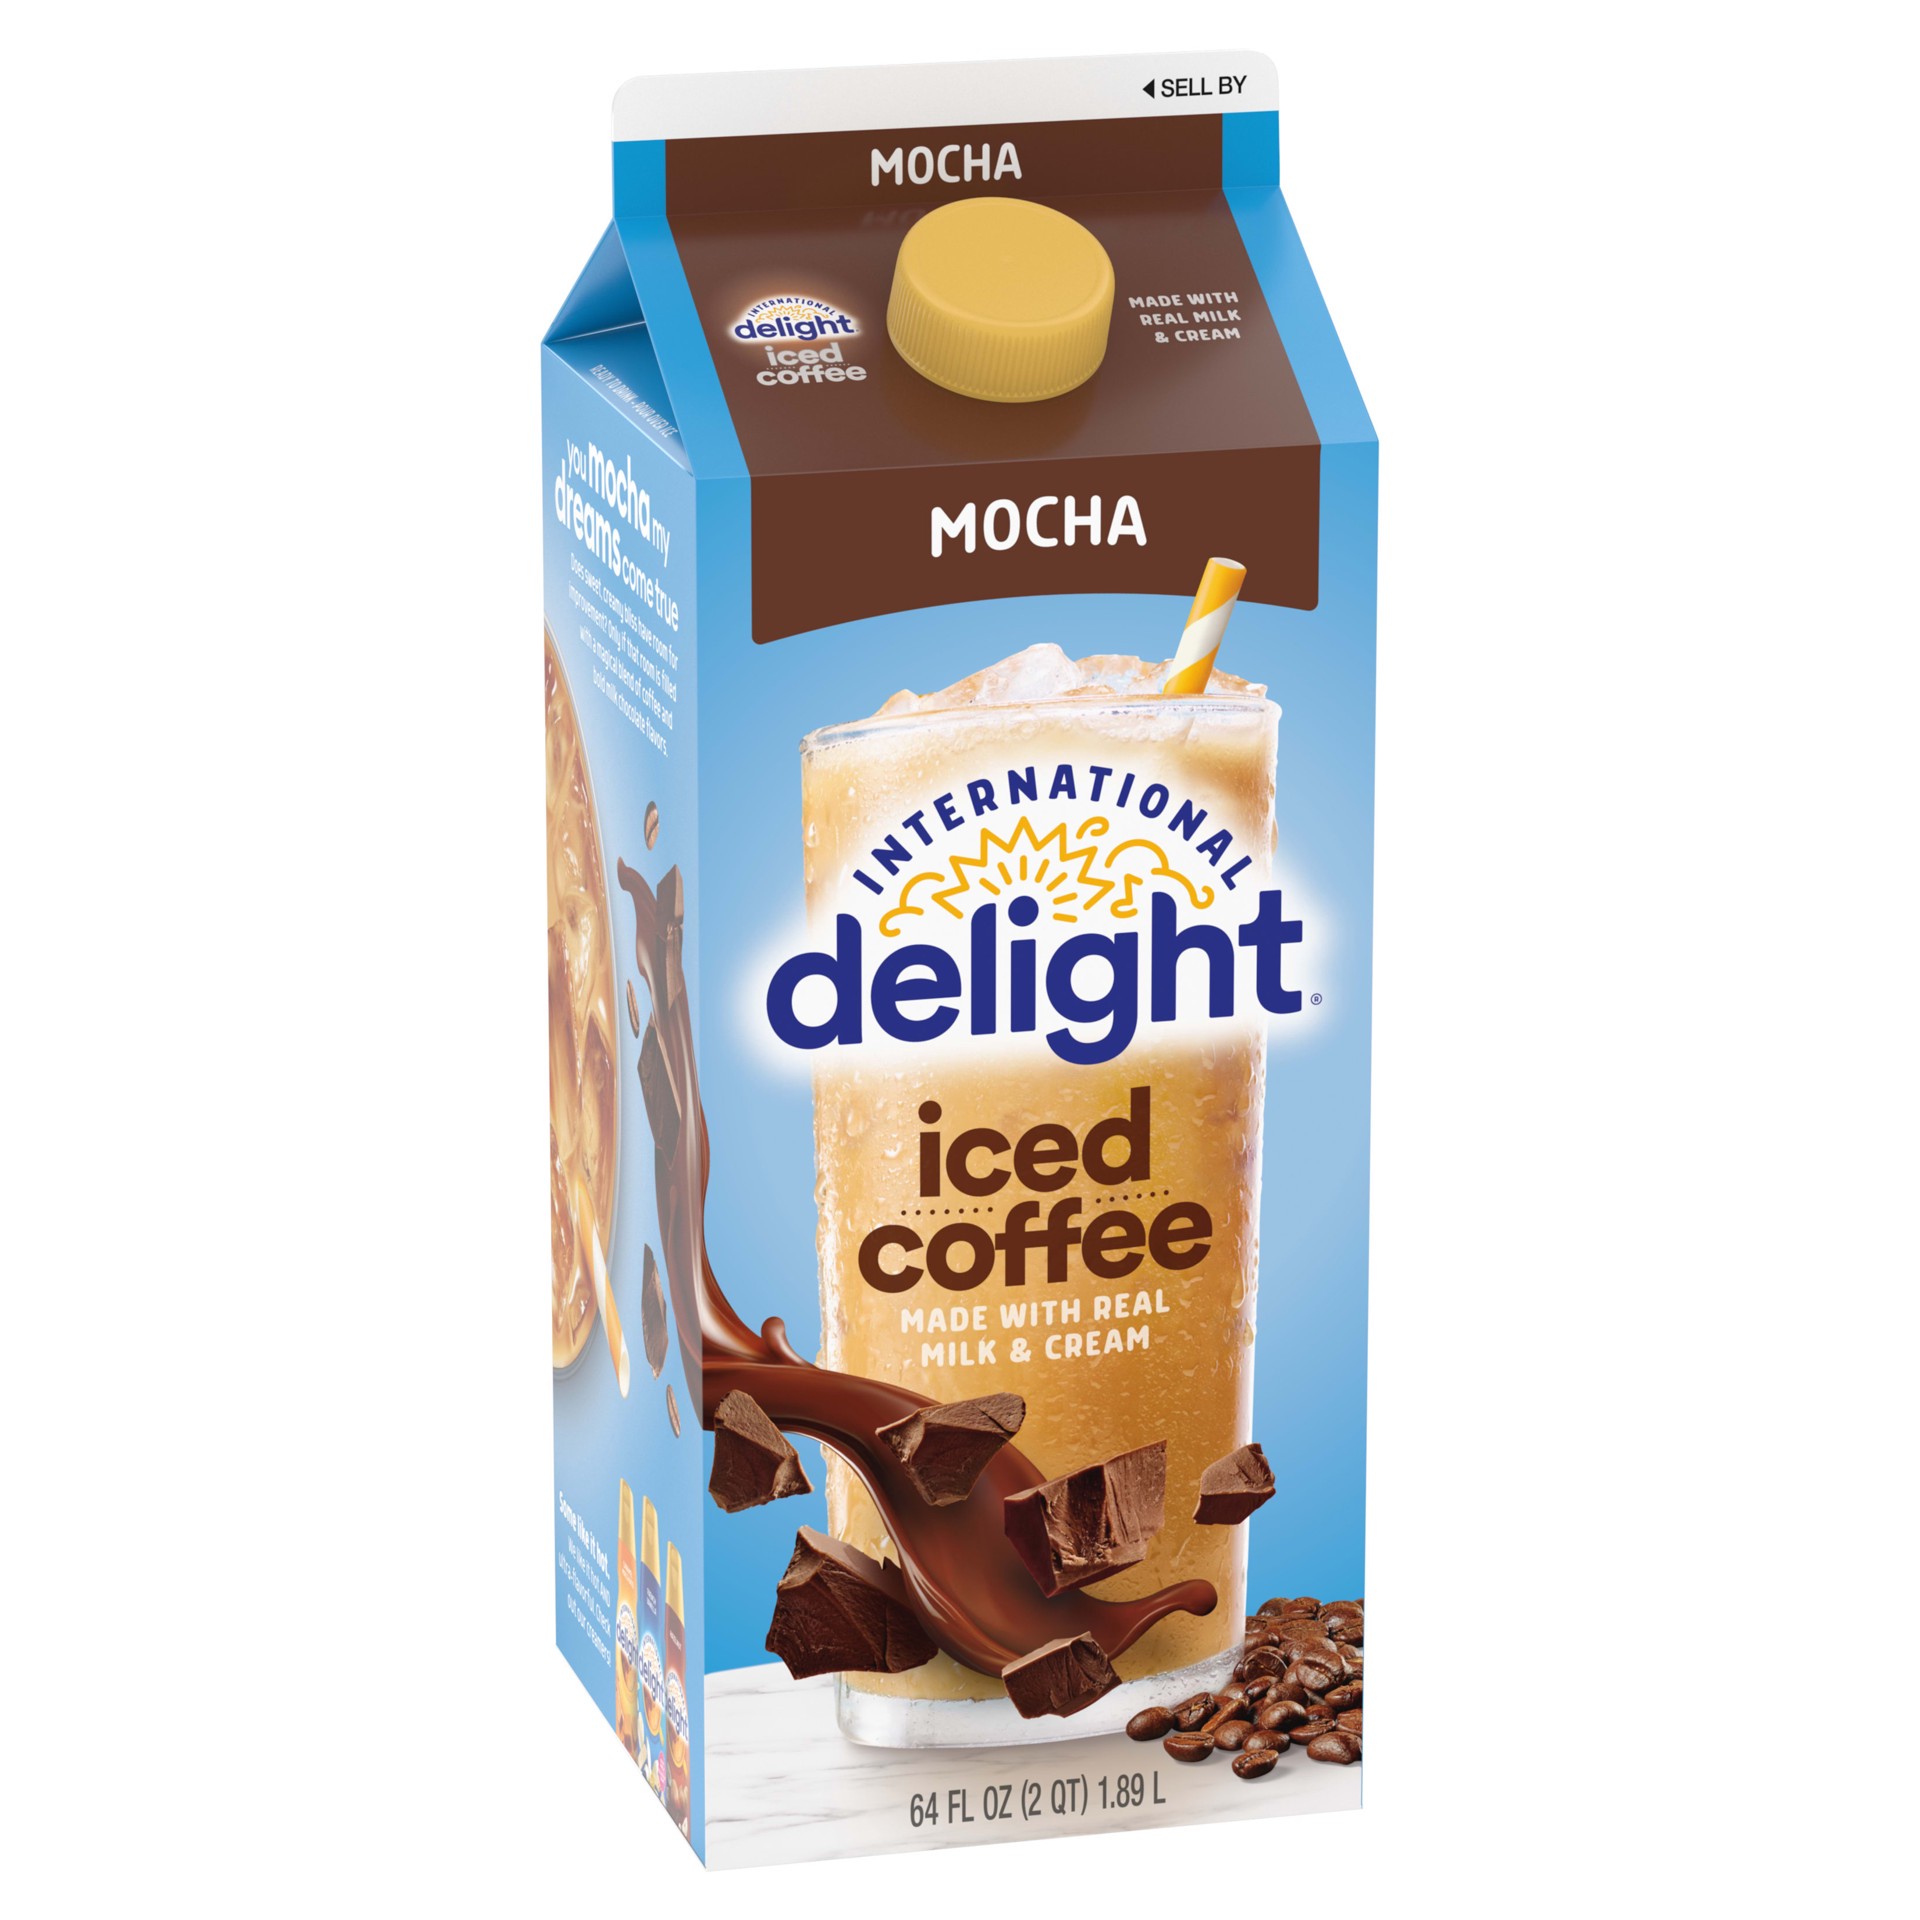 slide 5 of 5, International Delight Iced Coffee, Mocha, Ready to Pour Coffee Drinks Made with Real Milk and Cream, 64 FL OZ Carton, 64 PK